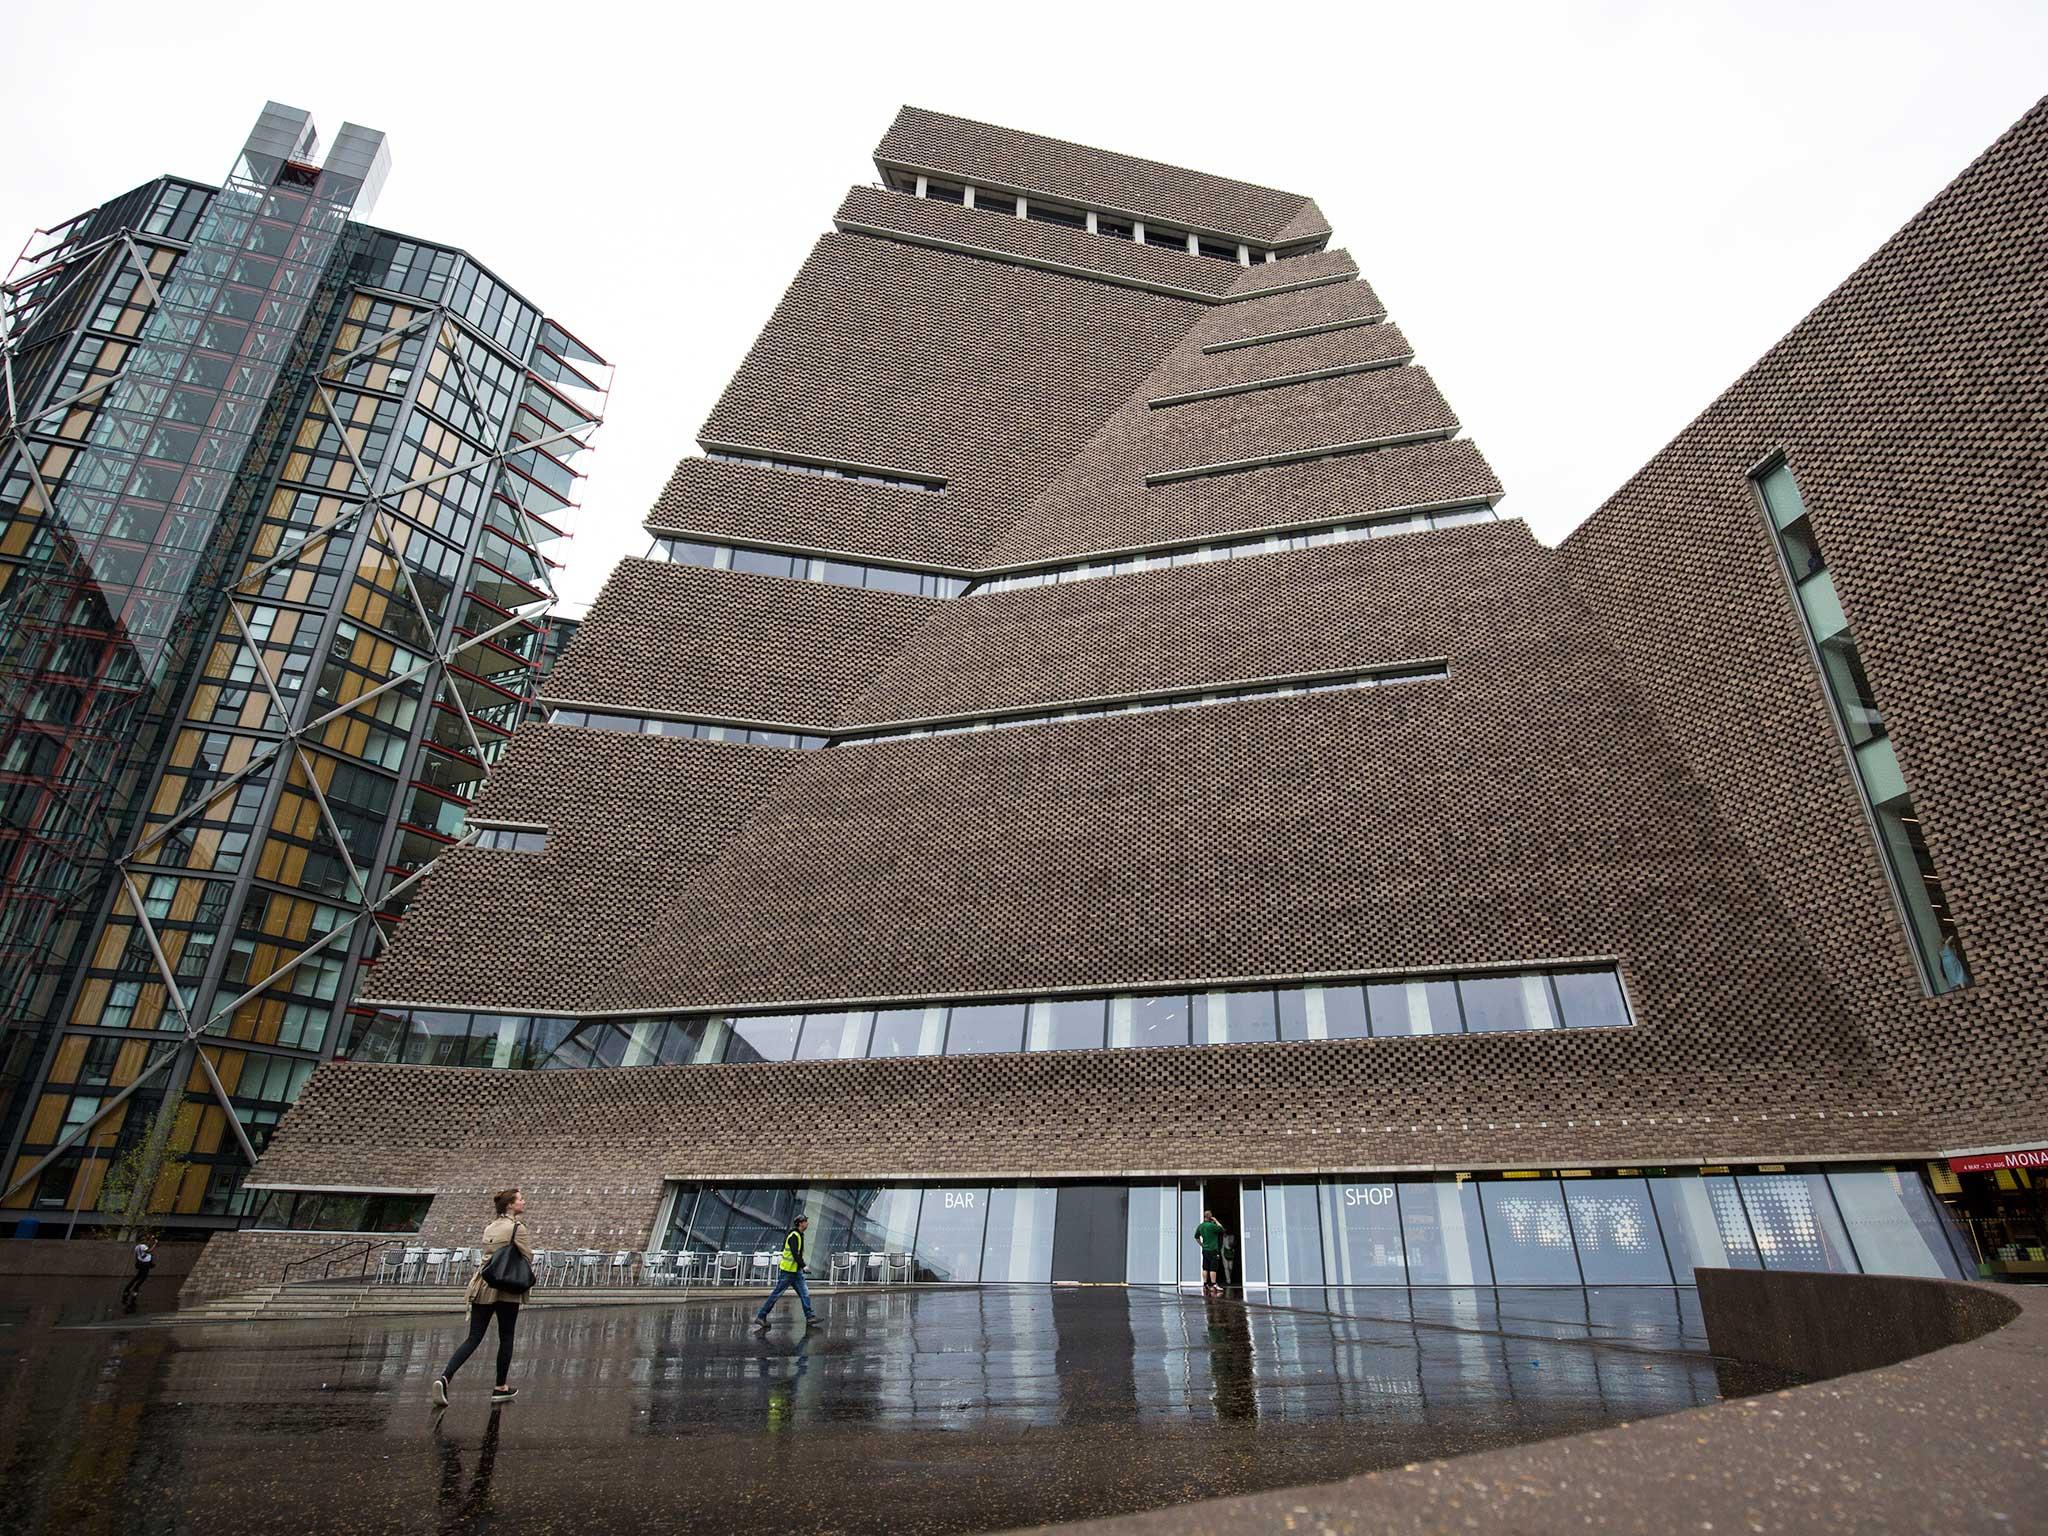 Last weekend, the Tate Modern gallery beat their own records with over 54,000 visitors in a single day.